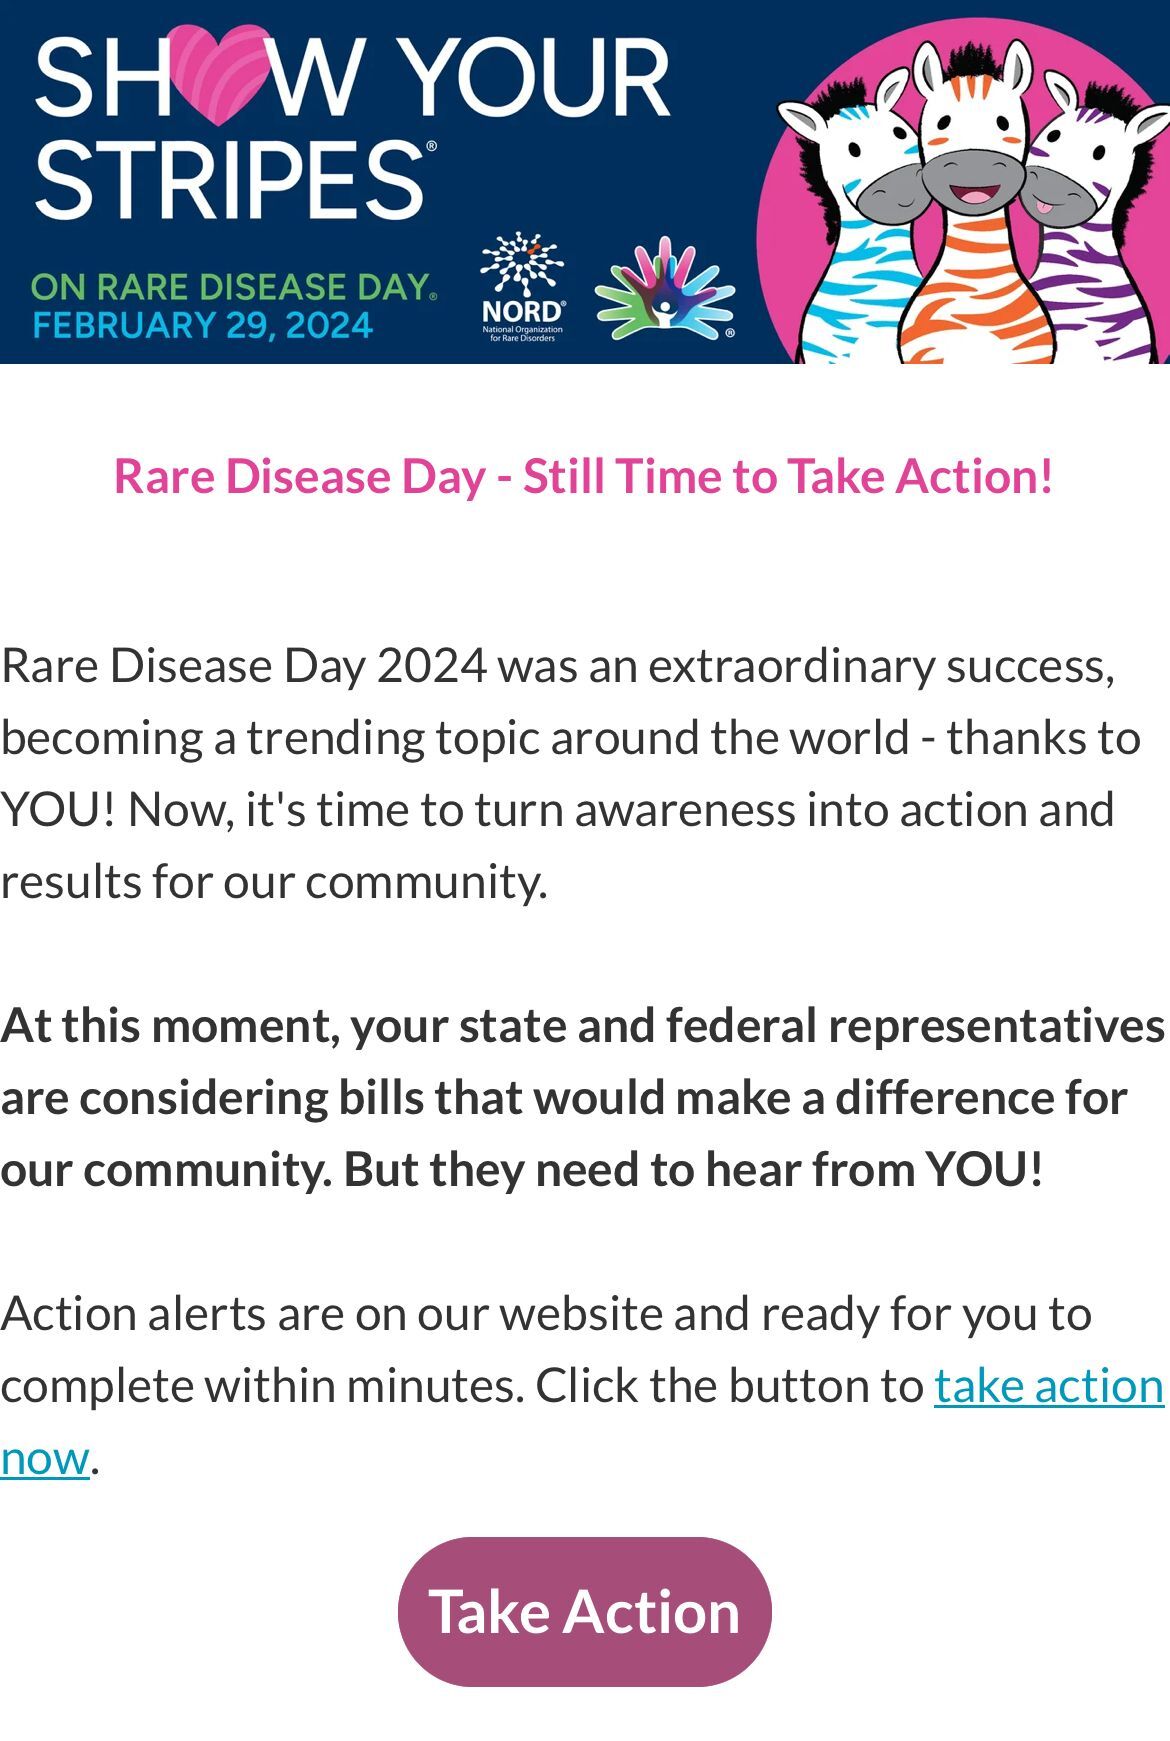 Take Action for Rare